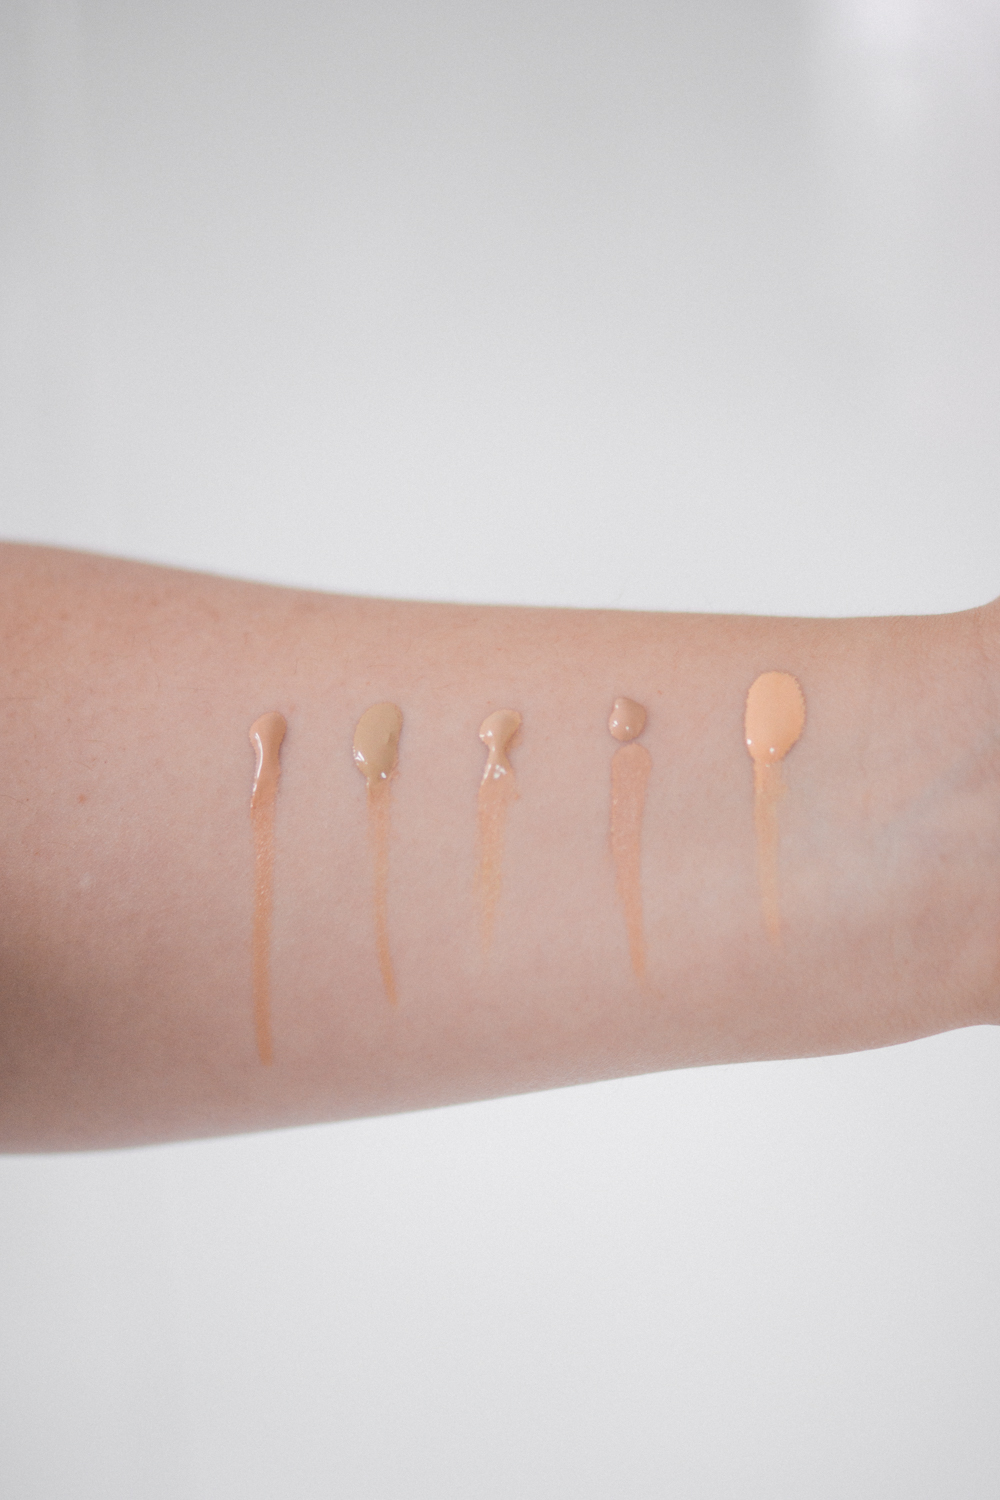 SUMMER READY, BARELY THERE BASES.